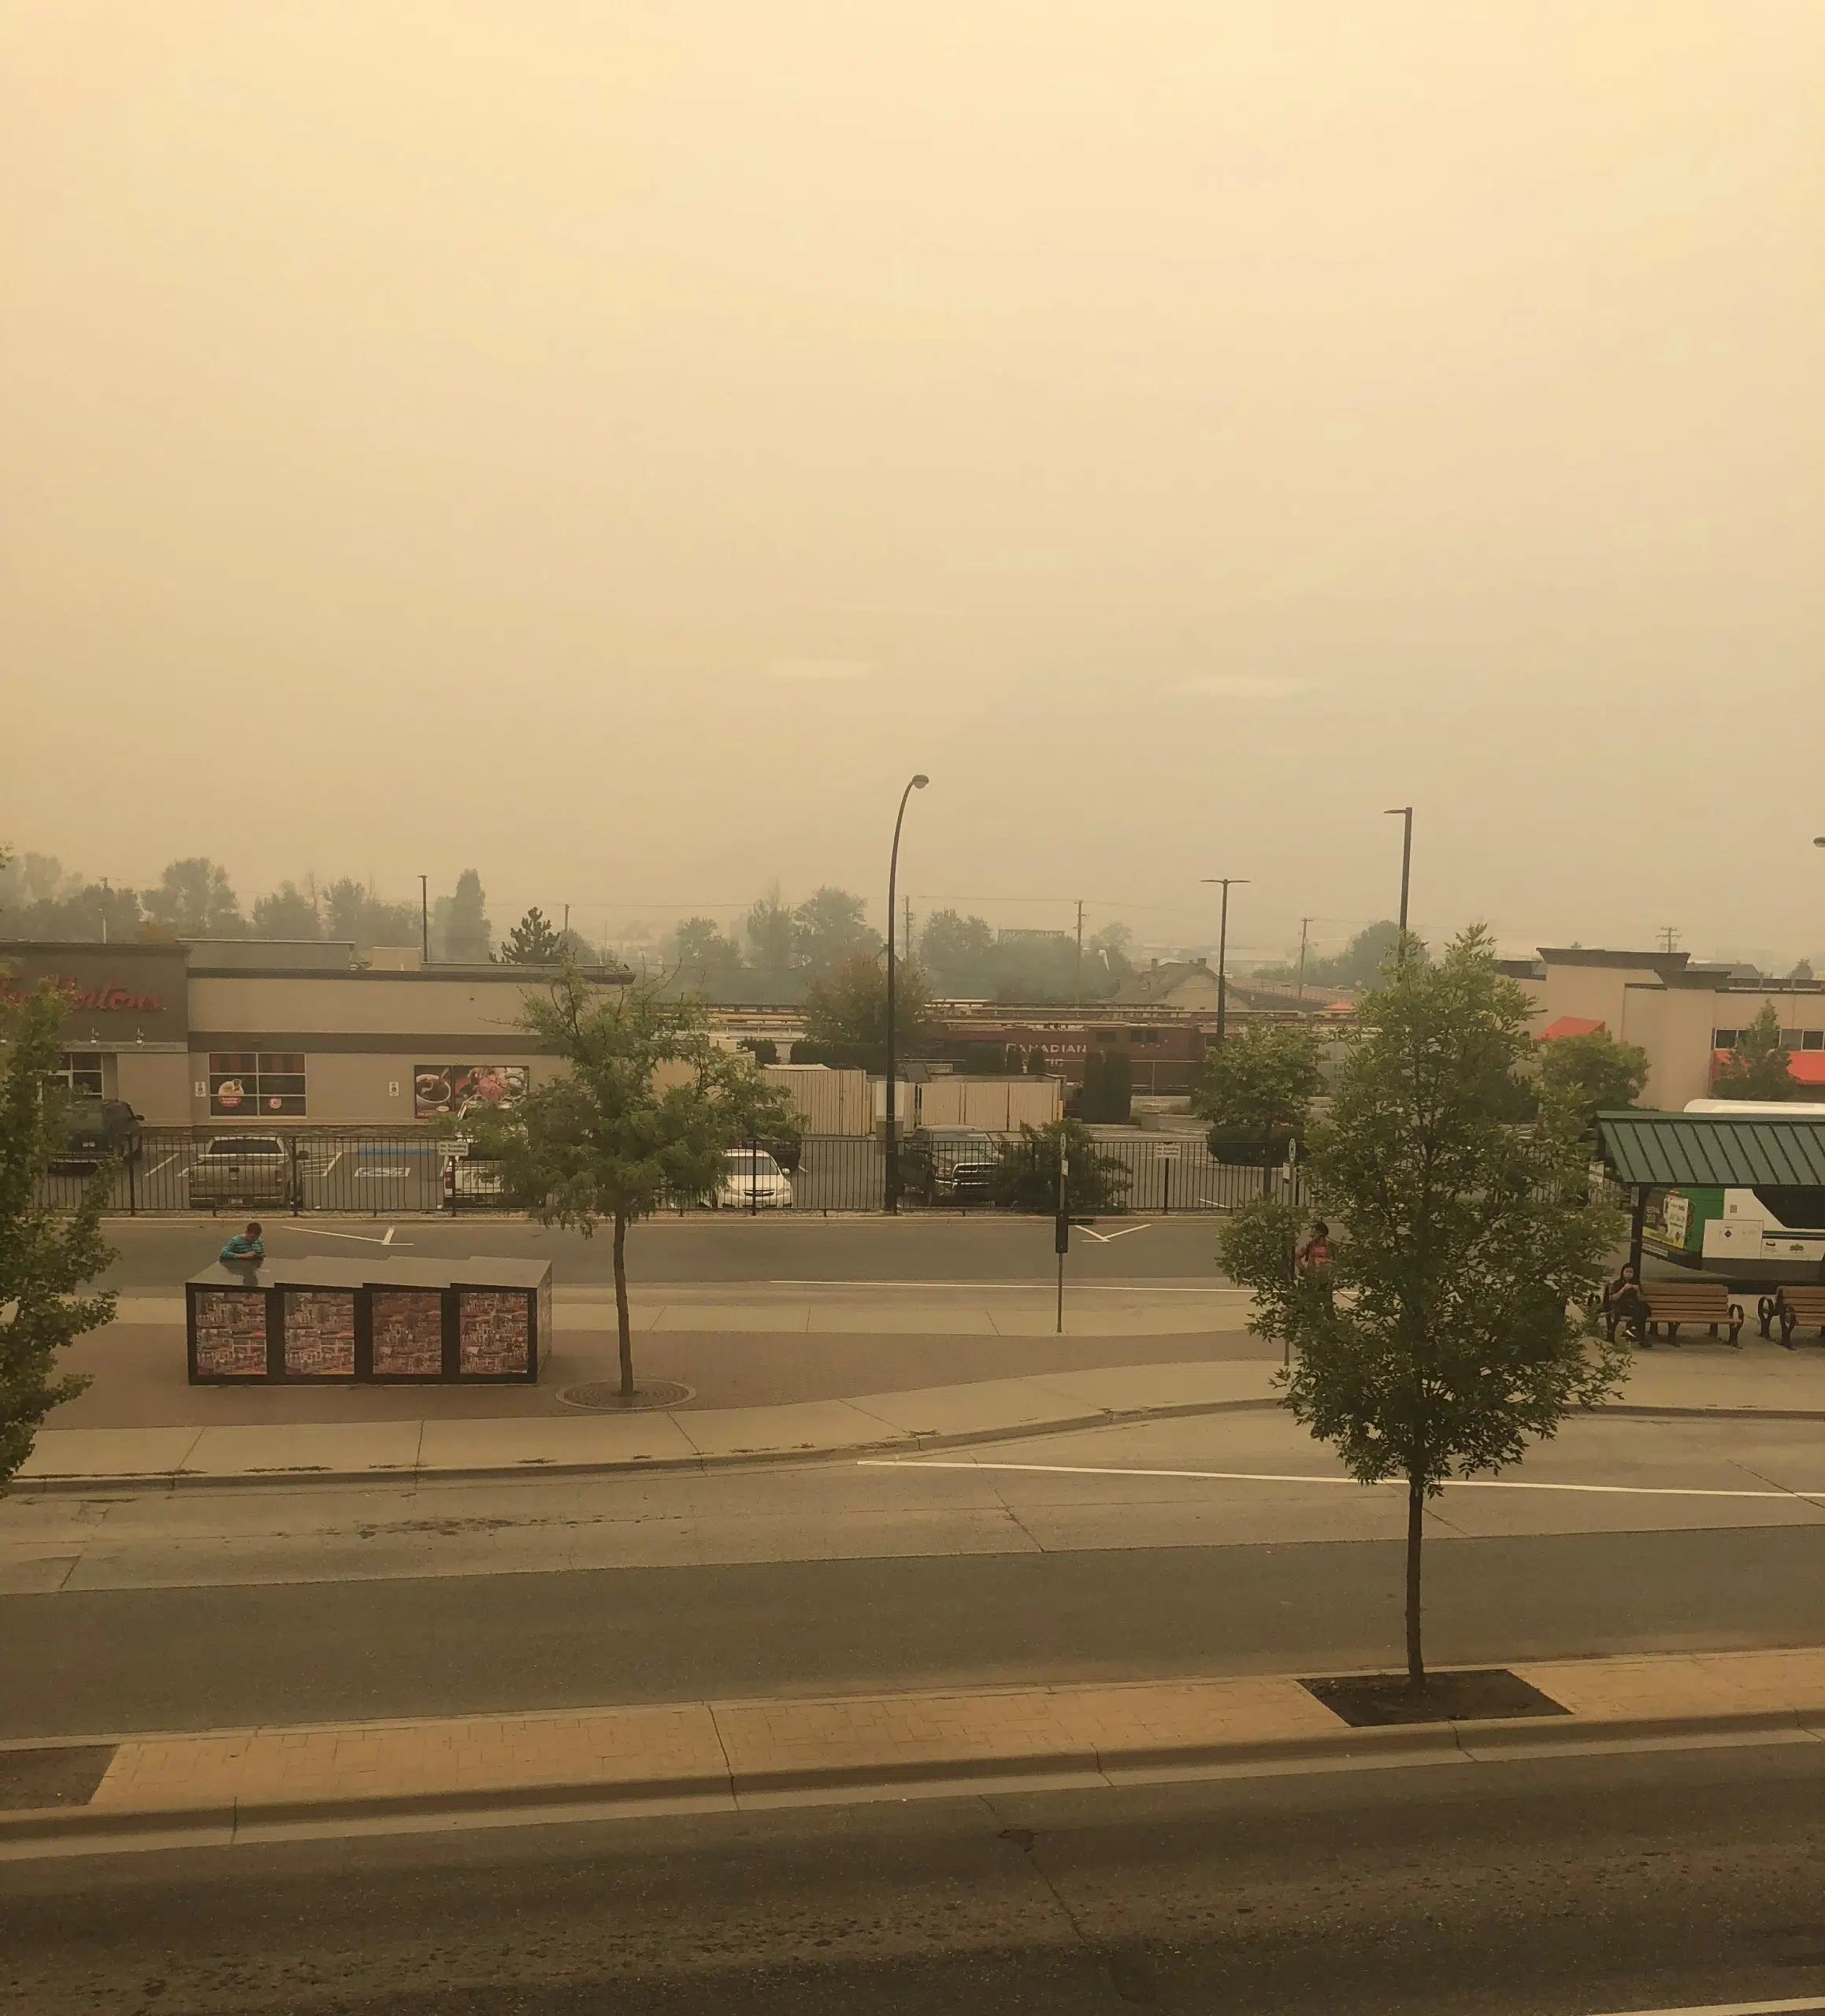 Air quality getting worse and worse as smoke continues to roll in to Kamloops